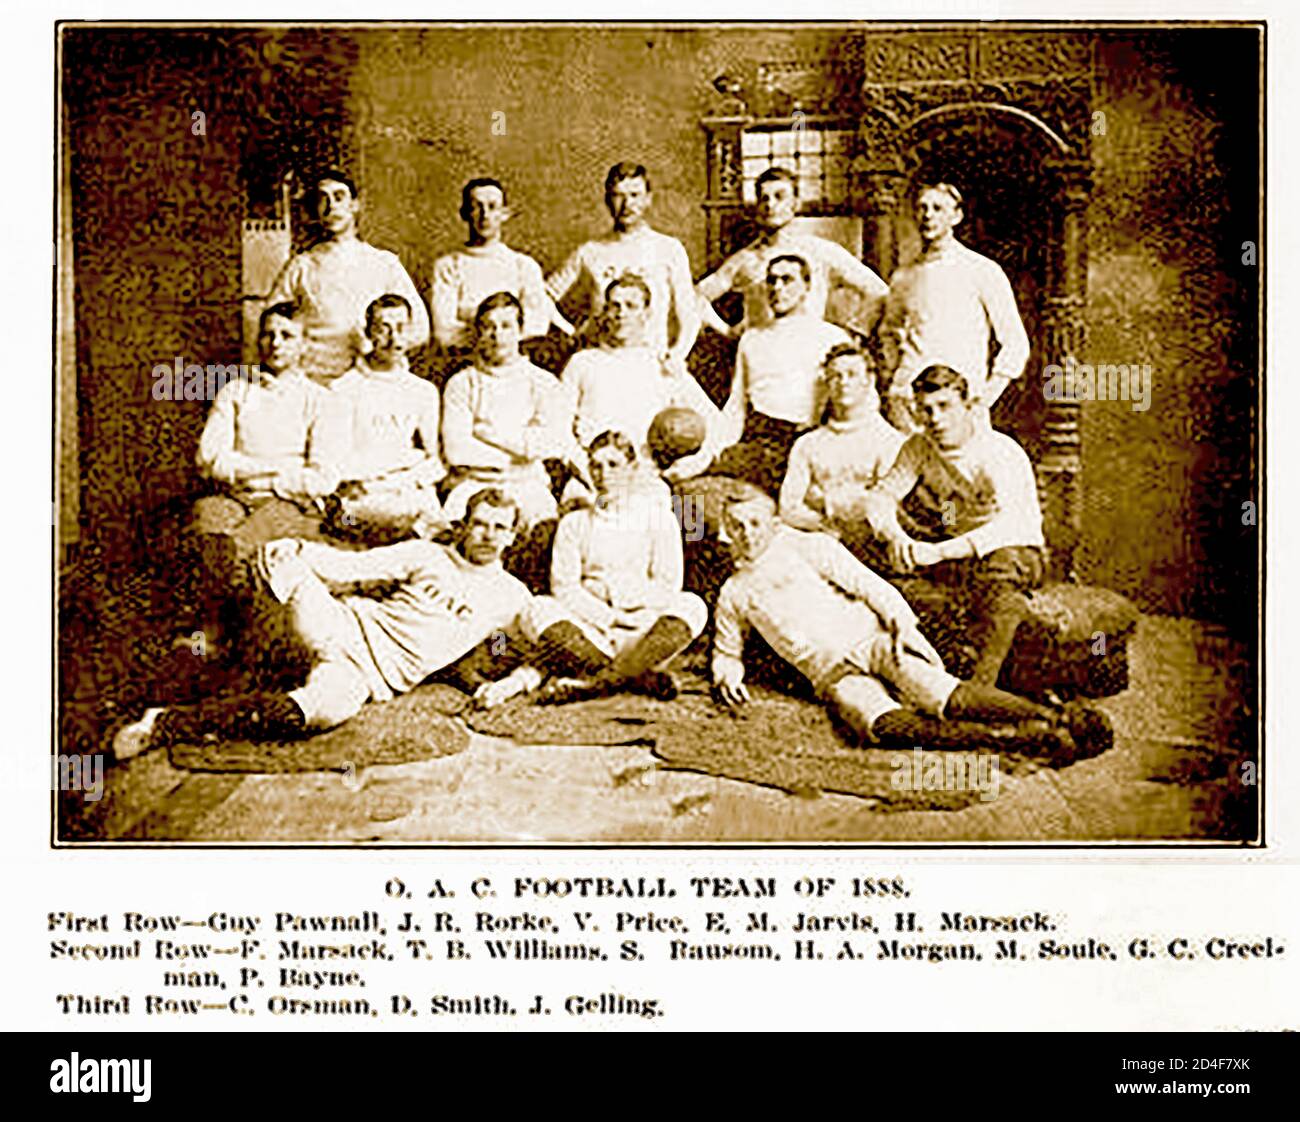 Ontario Agricultural College football team Canada 1888.  with names of players. First row -- Guy Pawnall, J R Rorke, V Price,  E M Jarvis, H Marsack -------------- 2nd row  -- F Marsack, T B Williams,S Rausom, H A Morgan, M Soule, G C Creel  -- it was originally the agricultural laboratories of the university of Guelph,gueph, toronto, university, and was officially founded in 1874 as an associate agricultural college of the University of Toronto. Since 1964, it has become affiliated with the University of Guelph Stock Photo